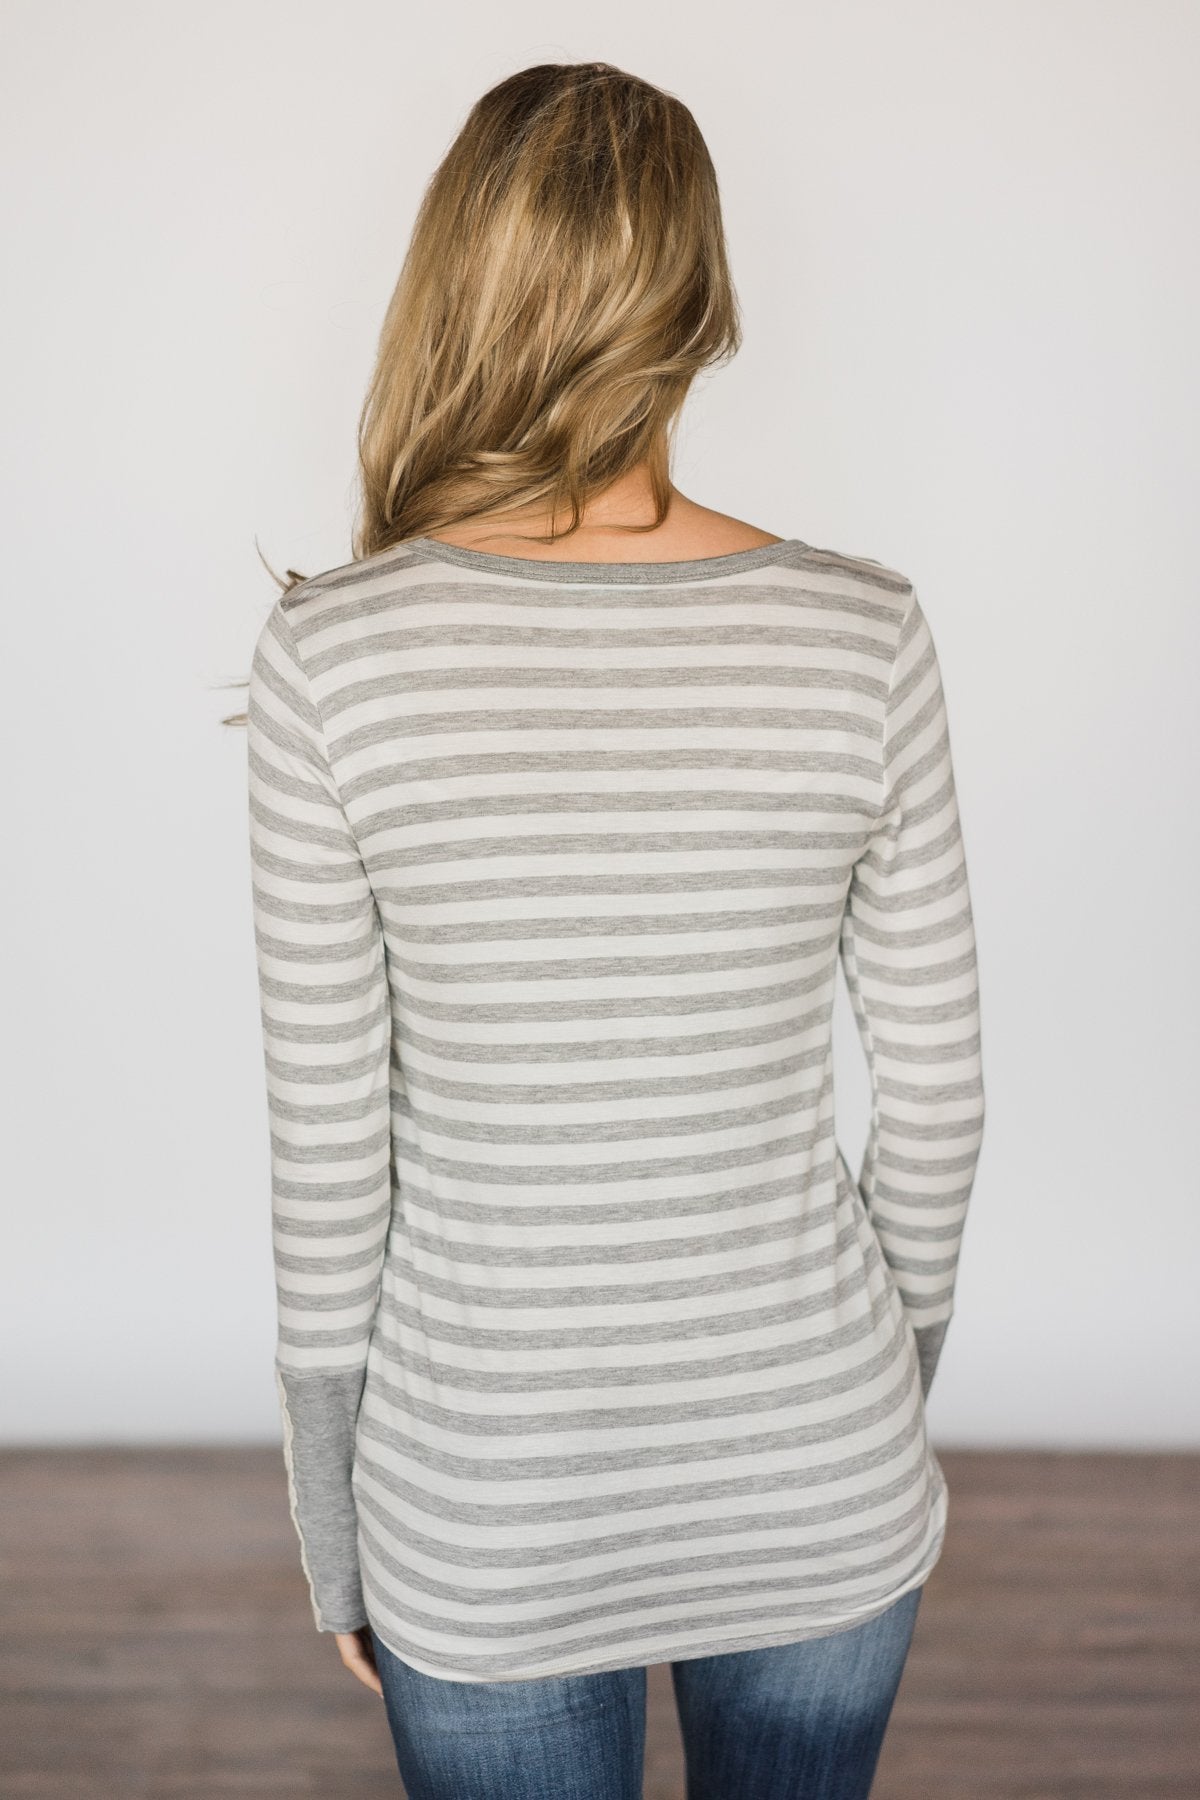 A Touch Of Lace Grey Striped Top